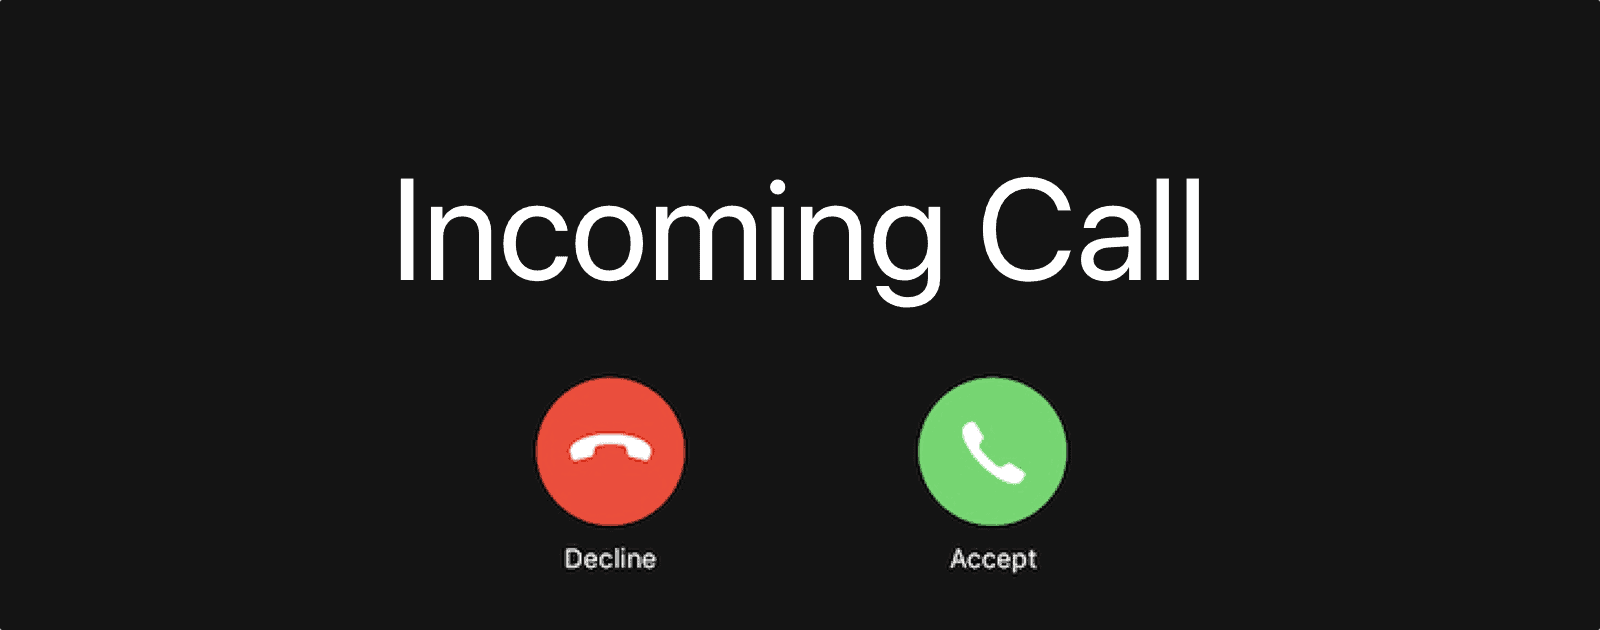 Phone Calls Are Dead. Is Voice Chat the Future?